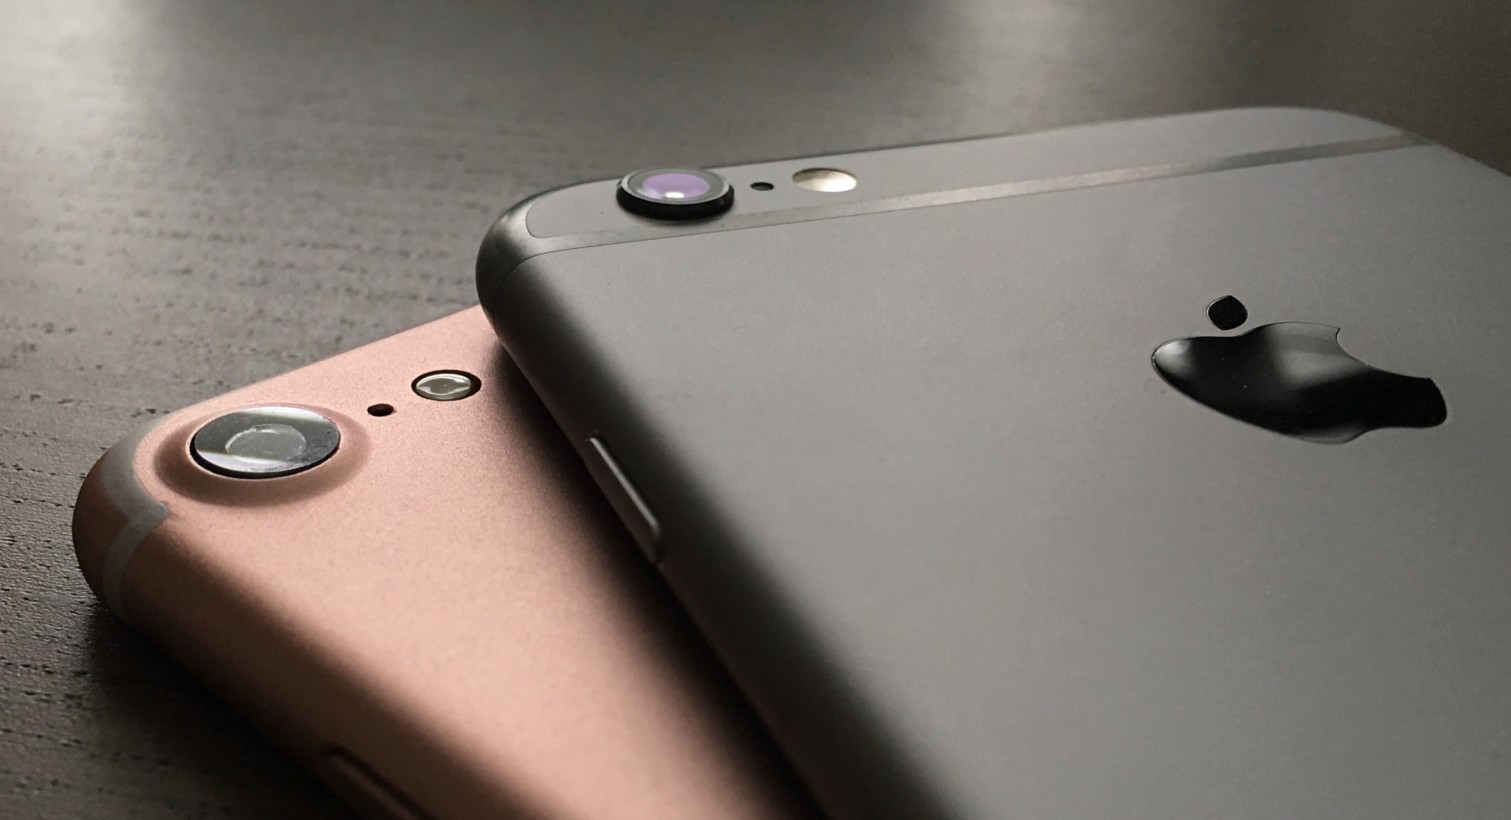 Here are the (alleged) specs for the iPhone 7 and 7 Plus